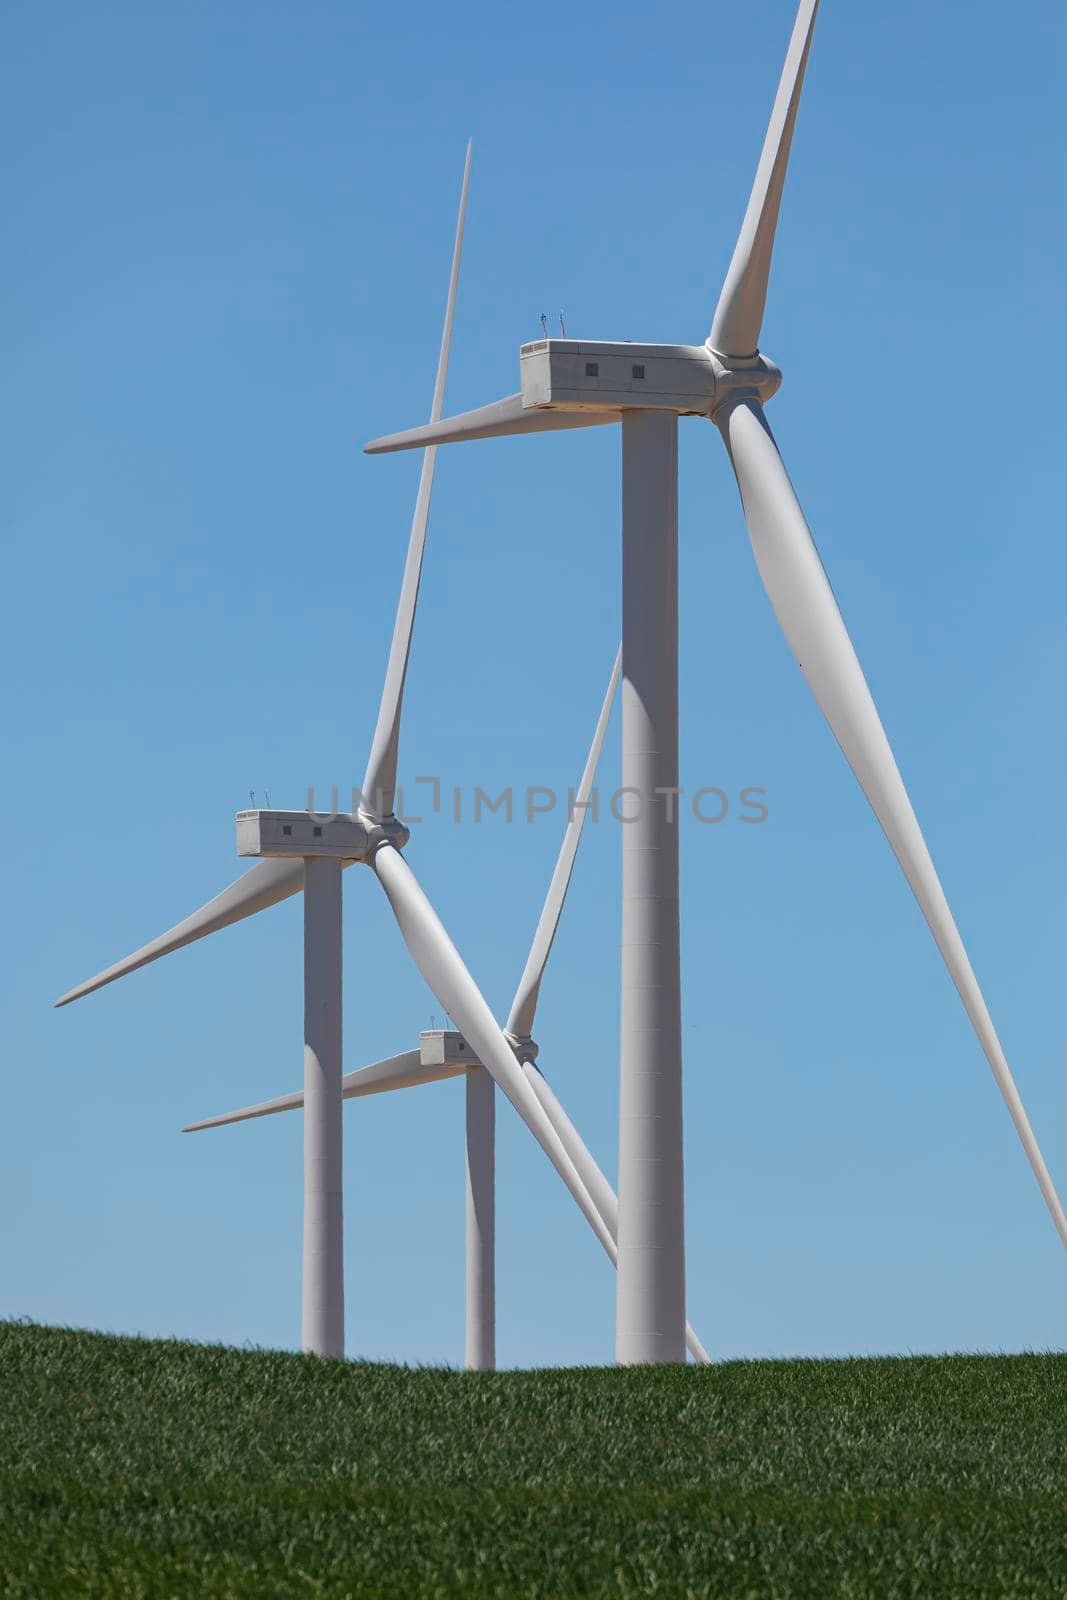 New wind turbines, recently installed in north of Spain, rotate with the wind over the corn fields, community of Aragon.